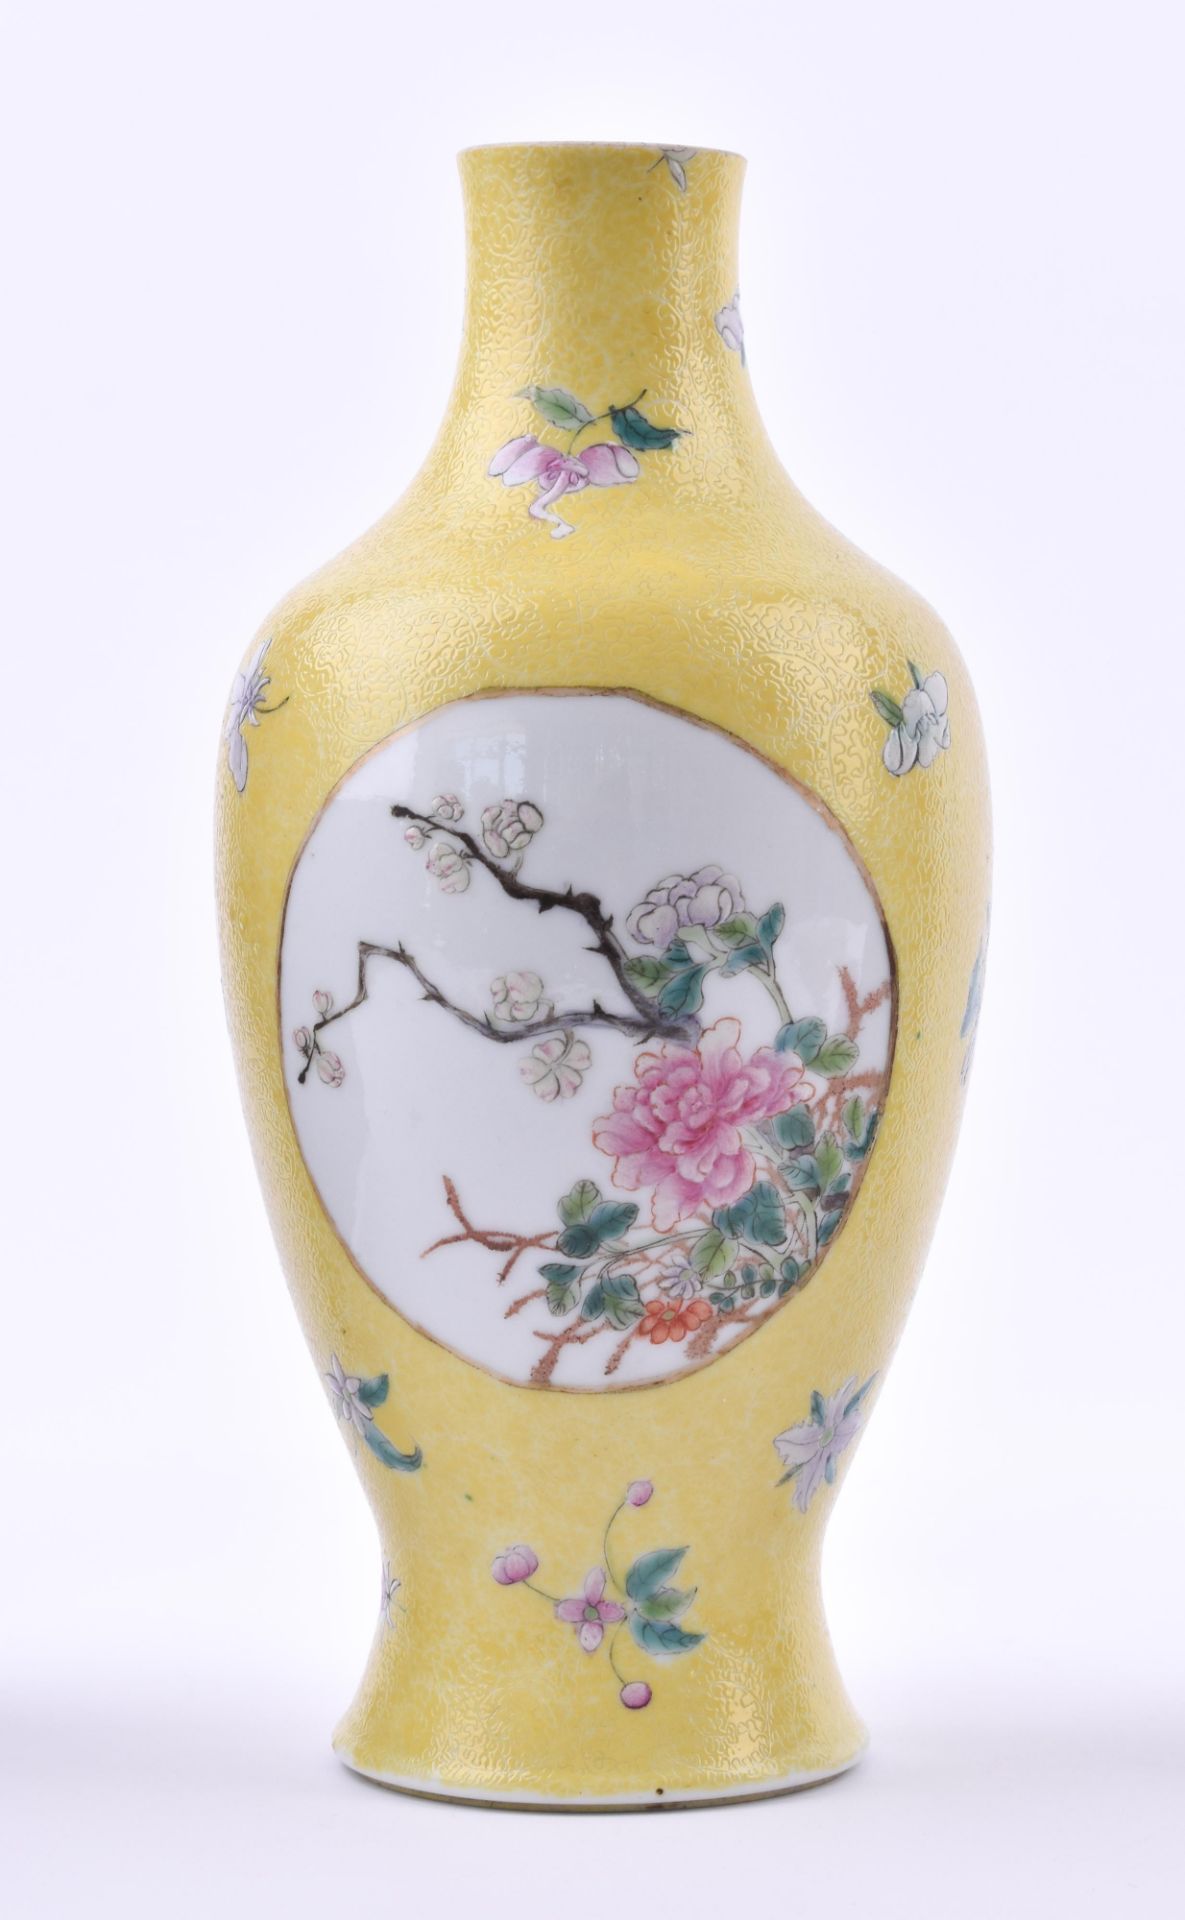 Vase China 18. Jhd. Chien Lung Dynastie